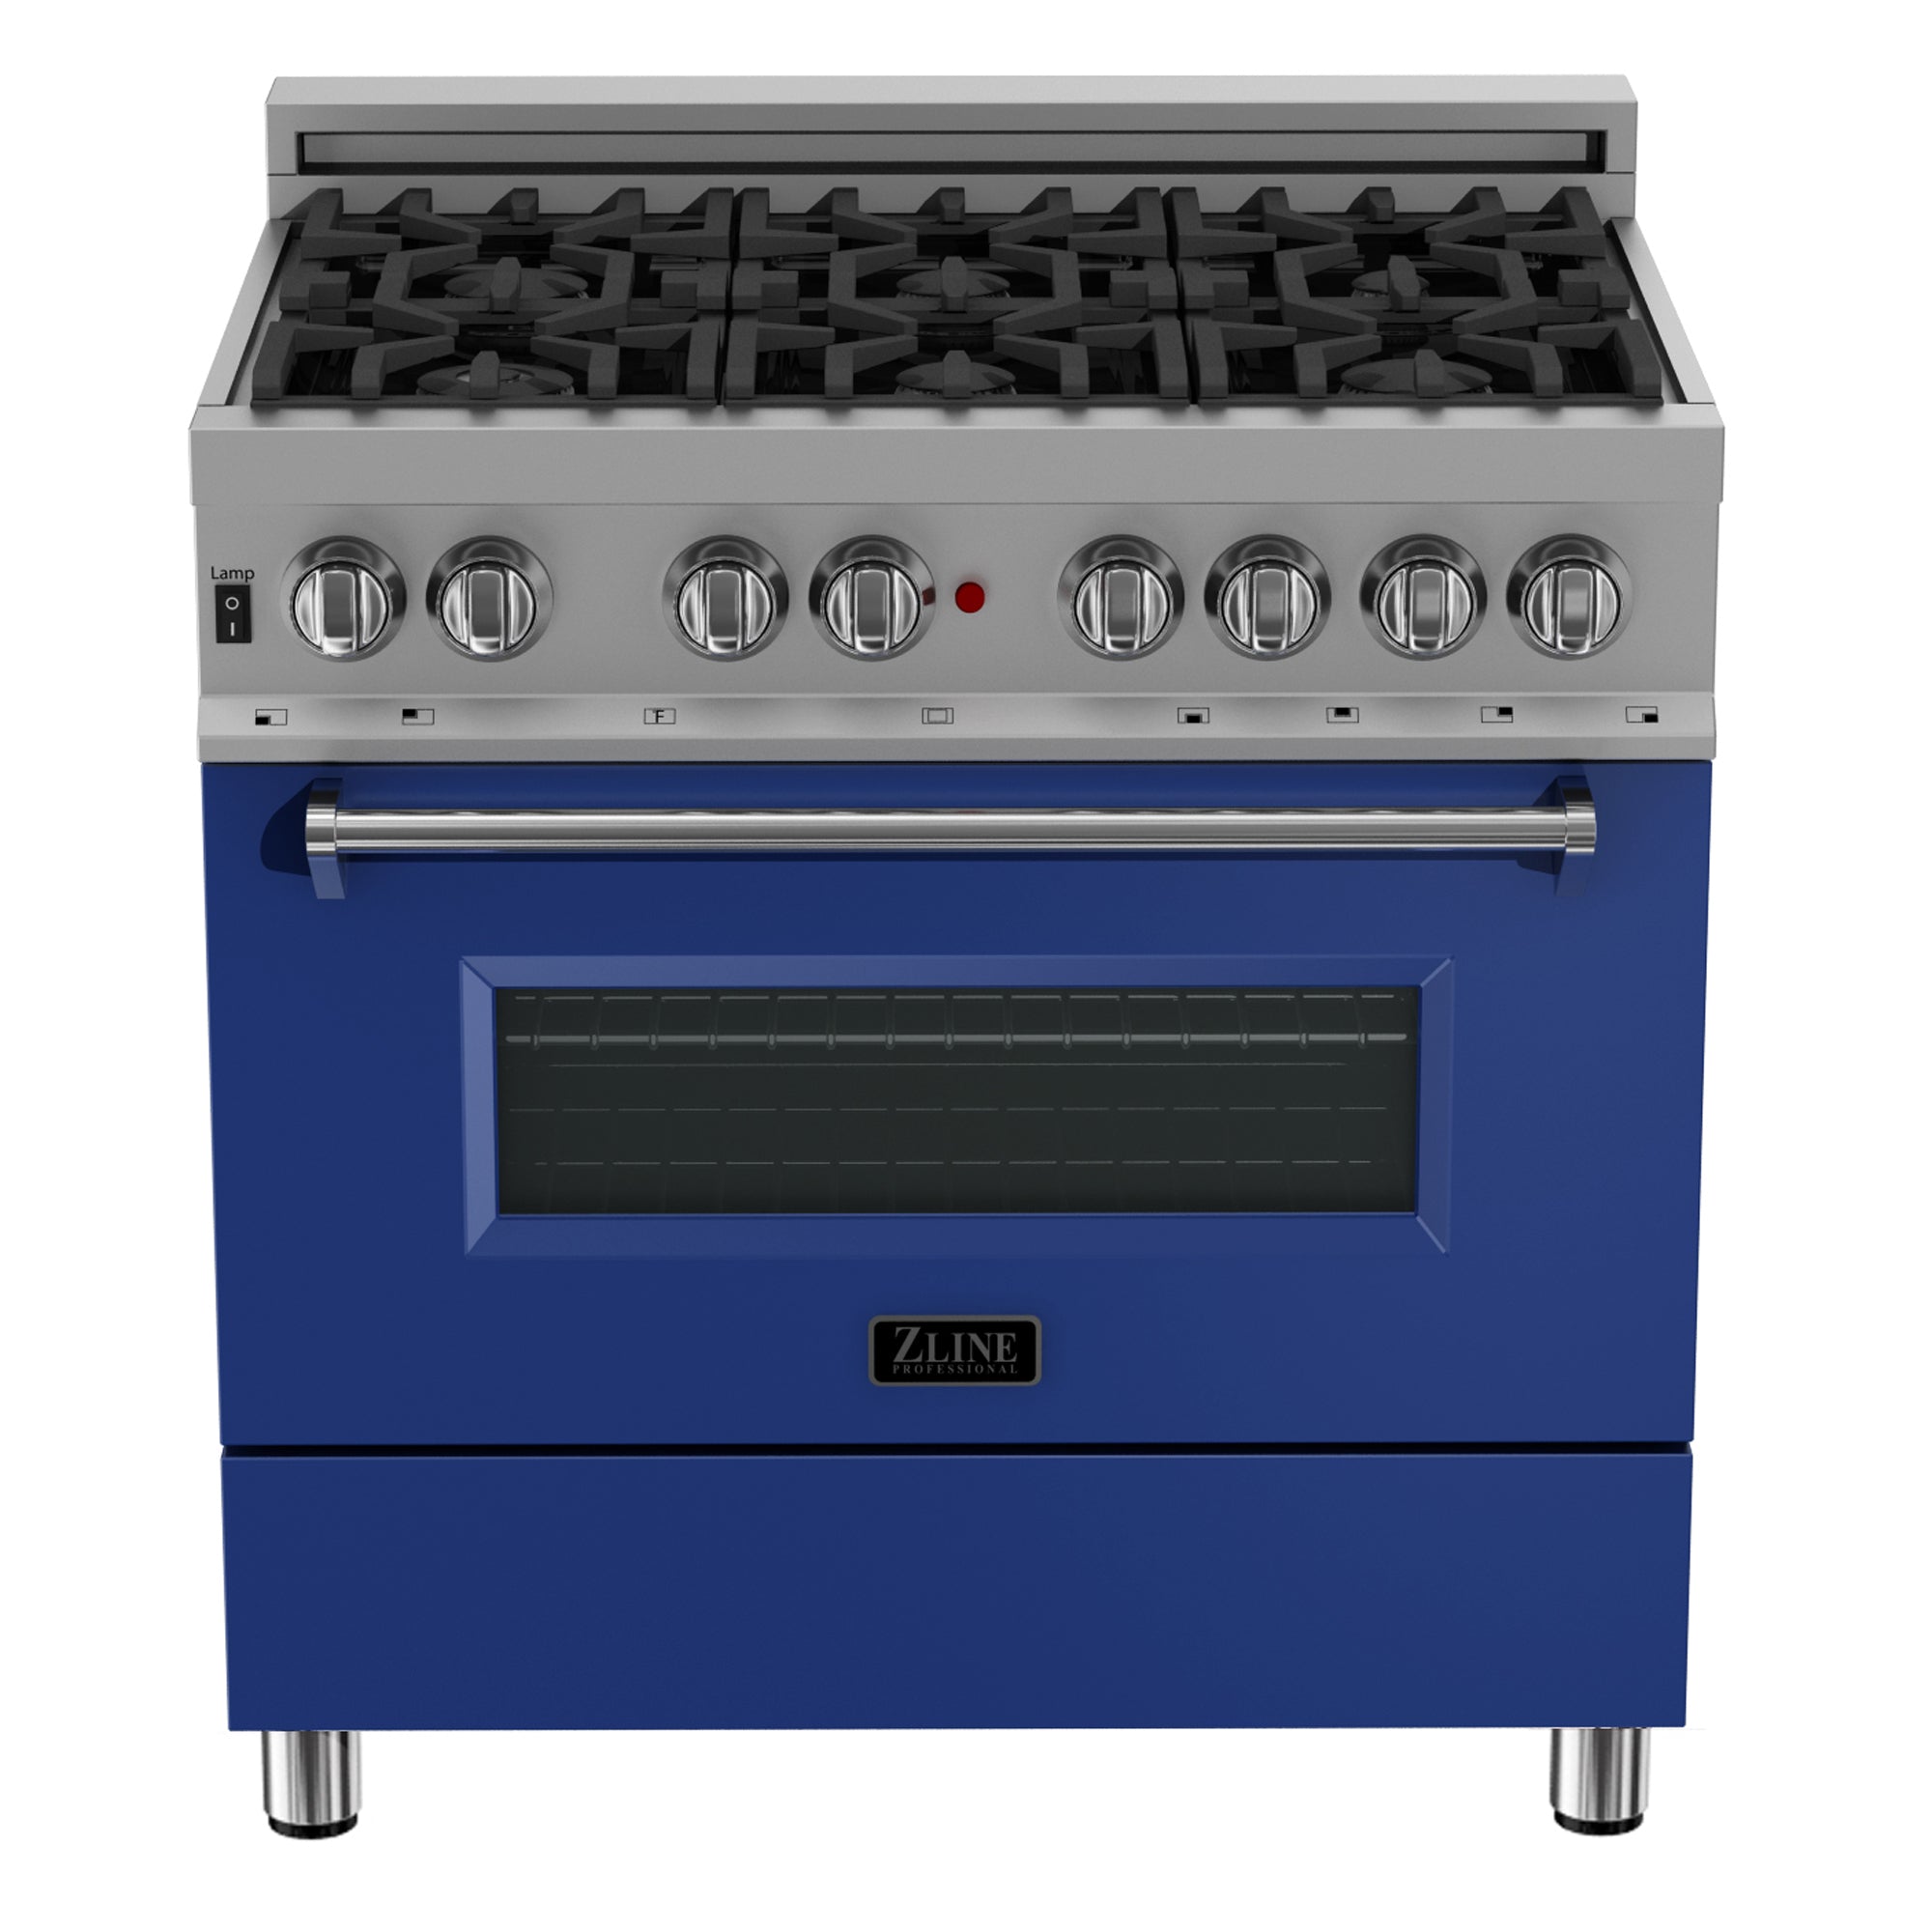 ZLINE 36" 4.6 cu. ft. Dual Fuel Range with Gas Stove and Electric Oven in Fingerprint Resistant Stainless Steel and Blue Matte Door (RAS-BM-36)